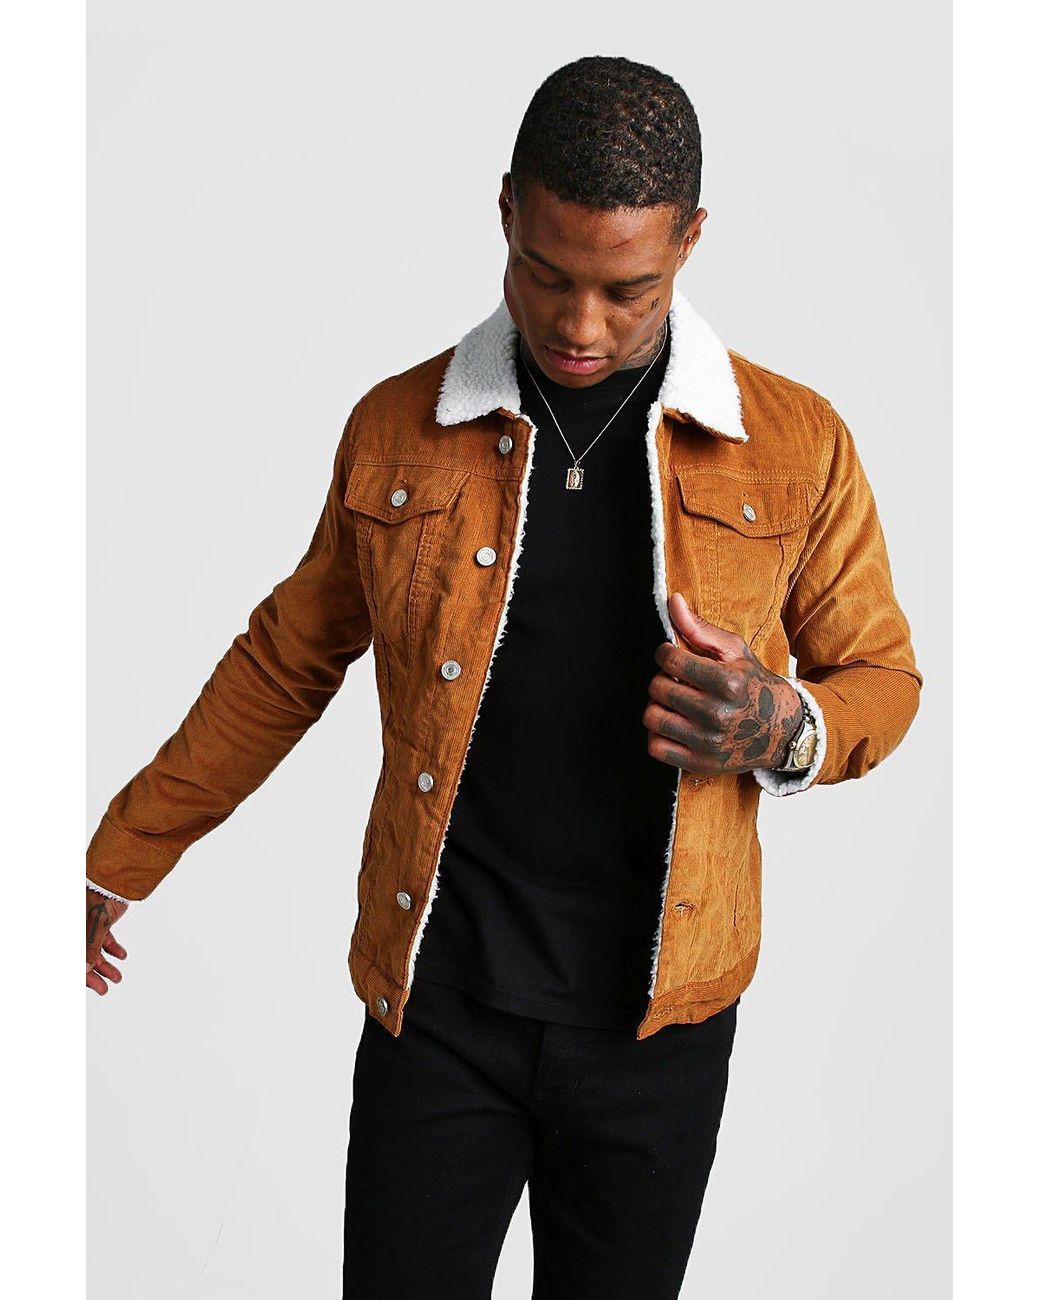 BoohooMAN Corduroy Jacket With Borg Collar for Men | Lyst